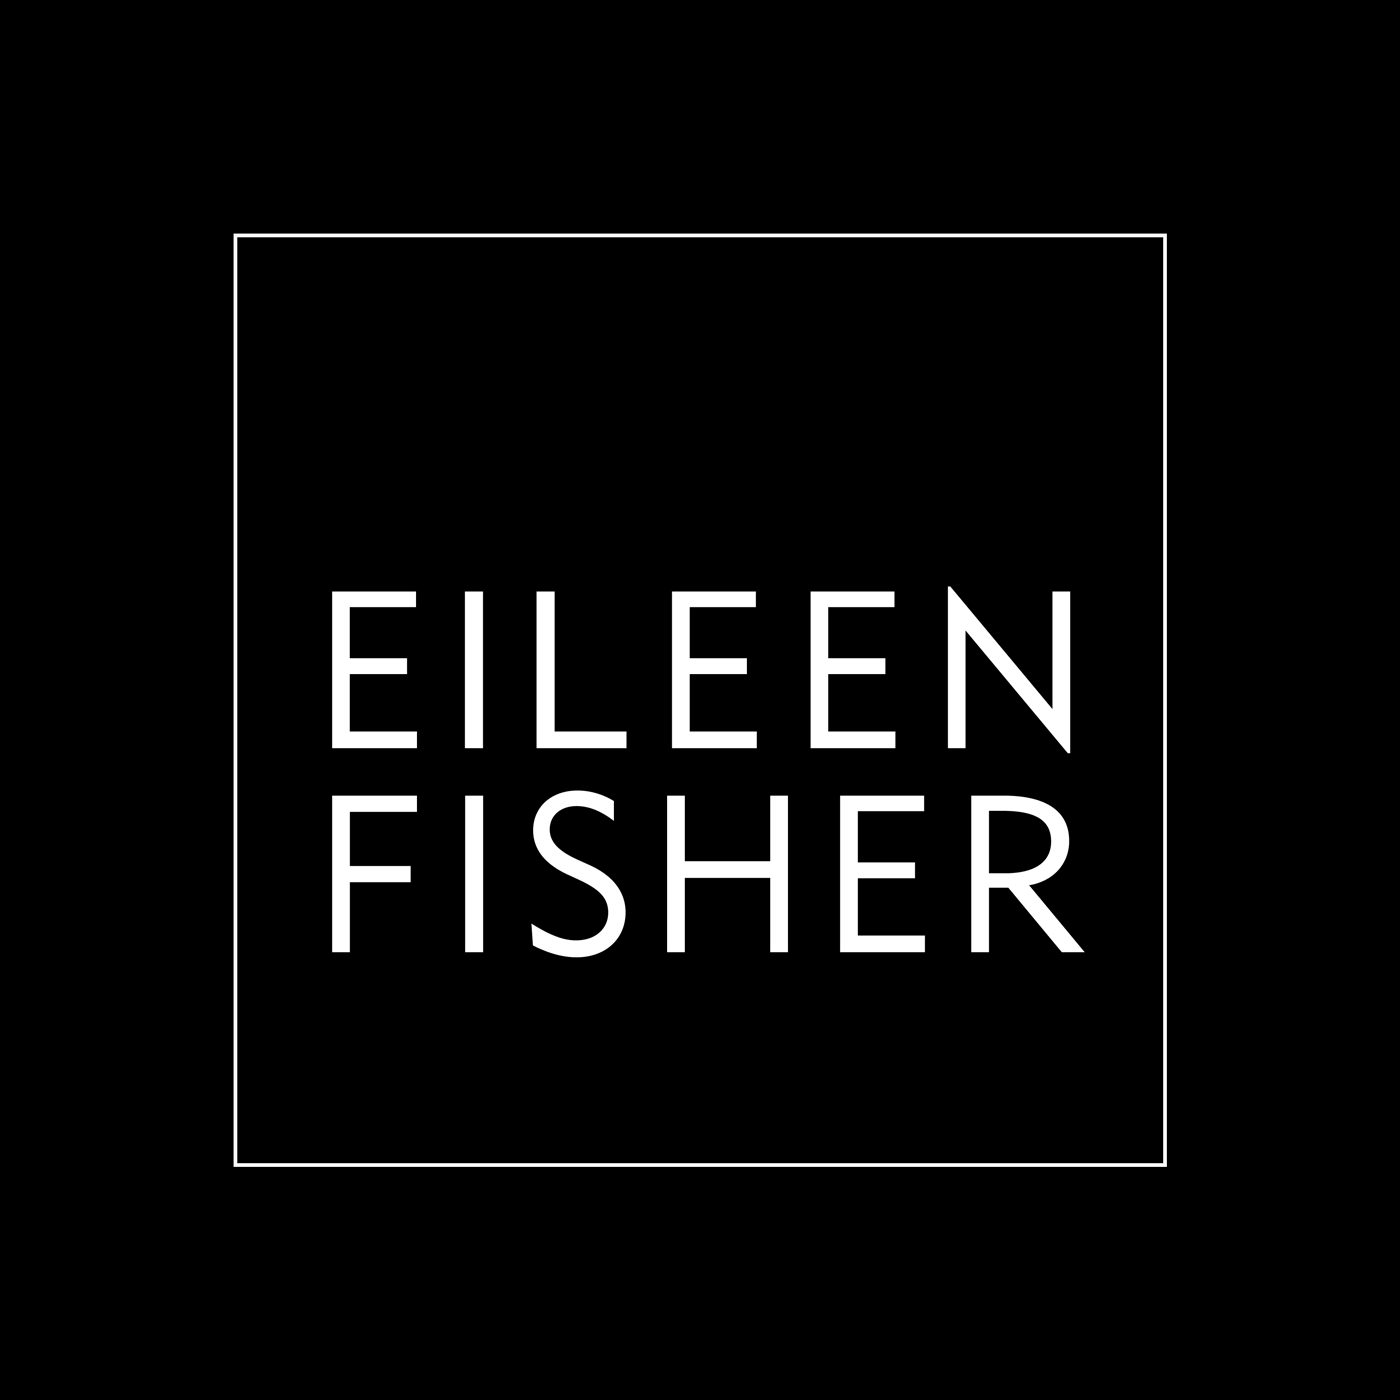 The Fisher Logo - Eileen Fisher logo - Fonts In Use